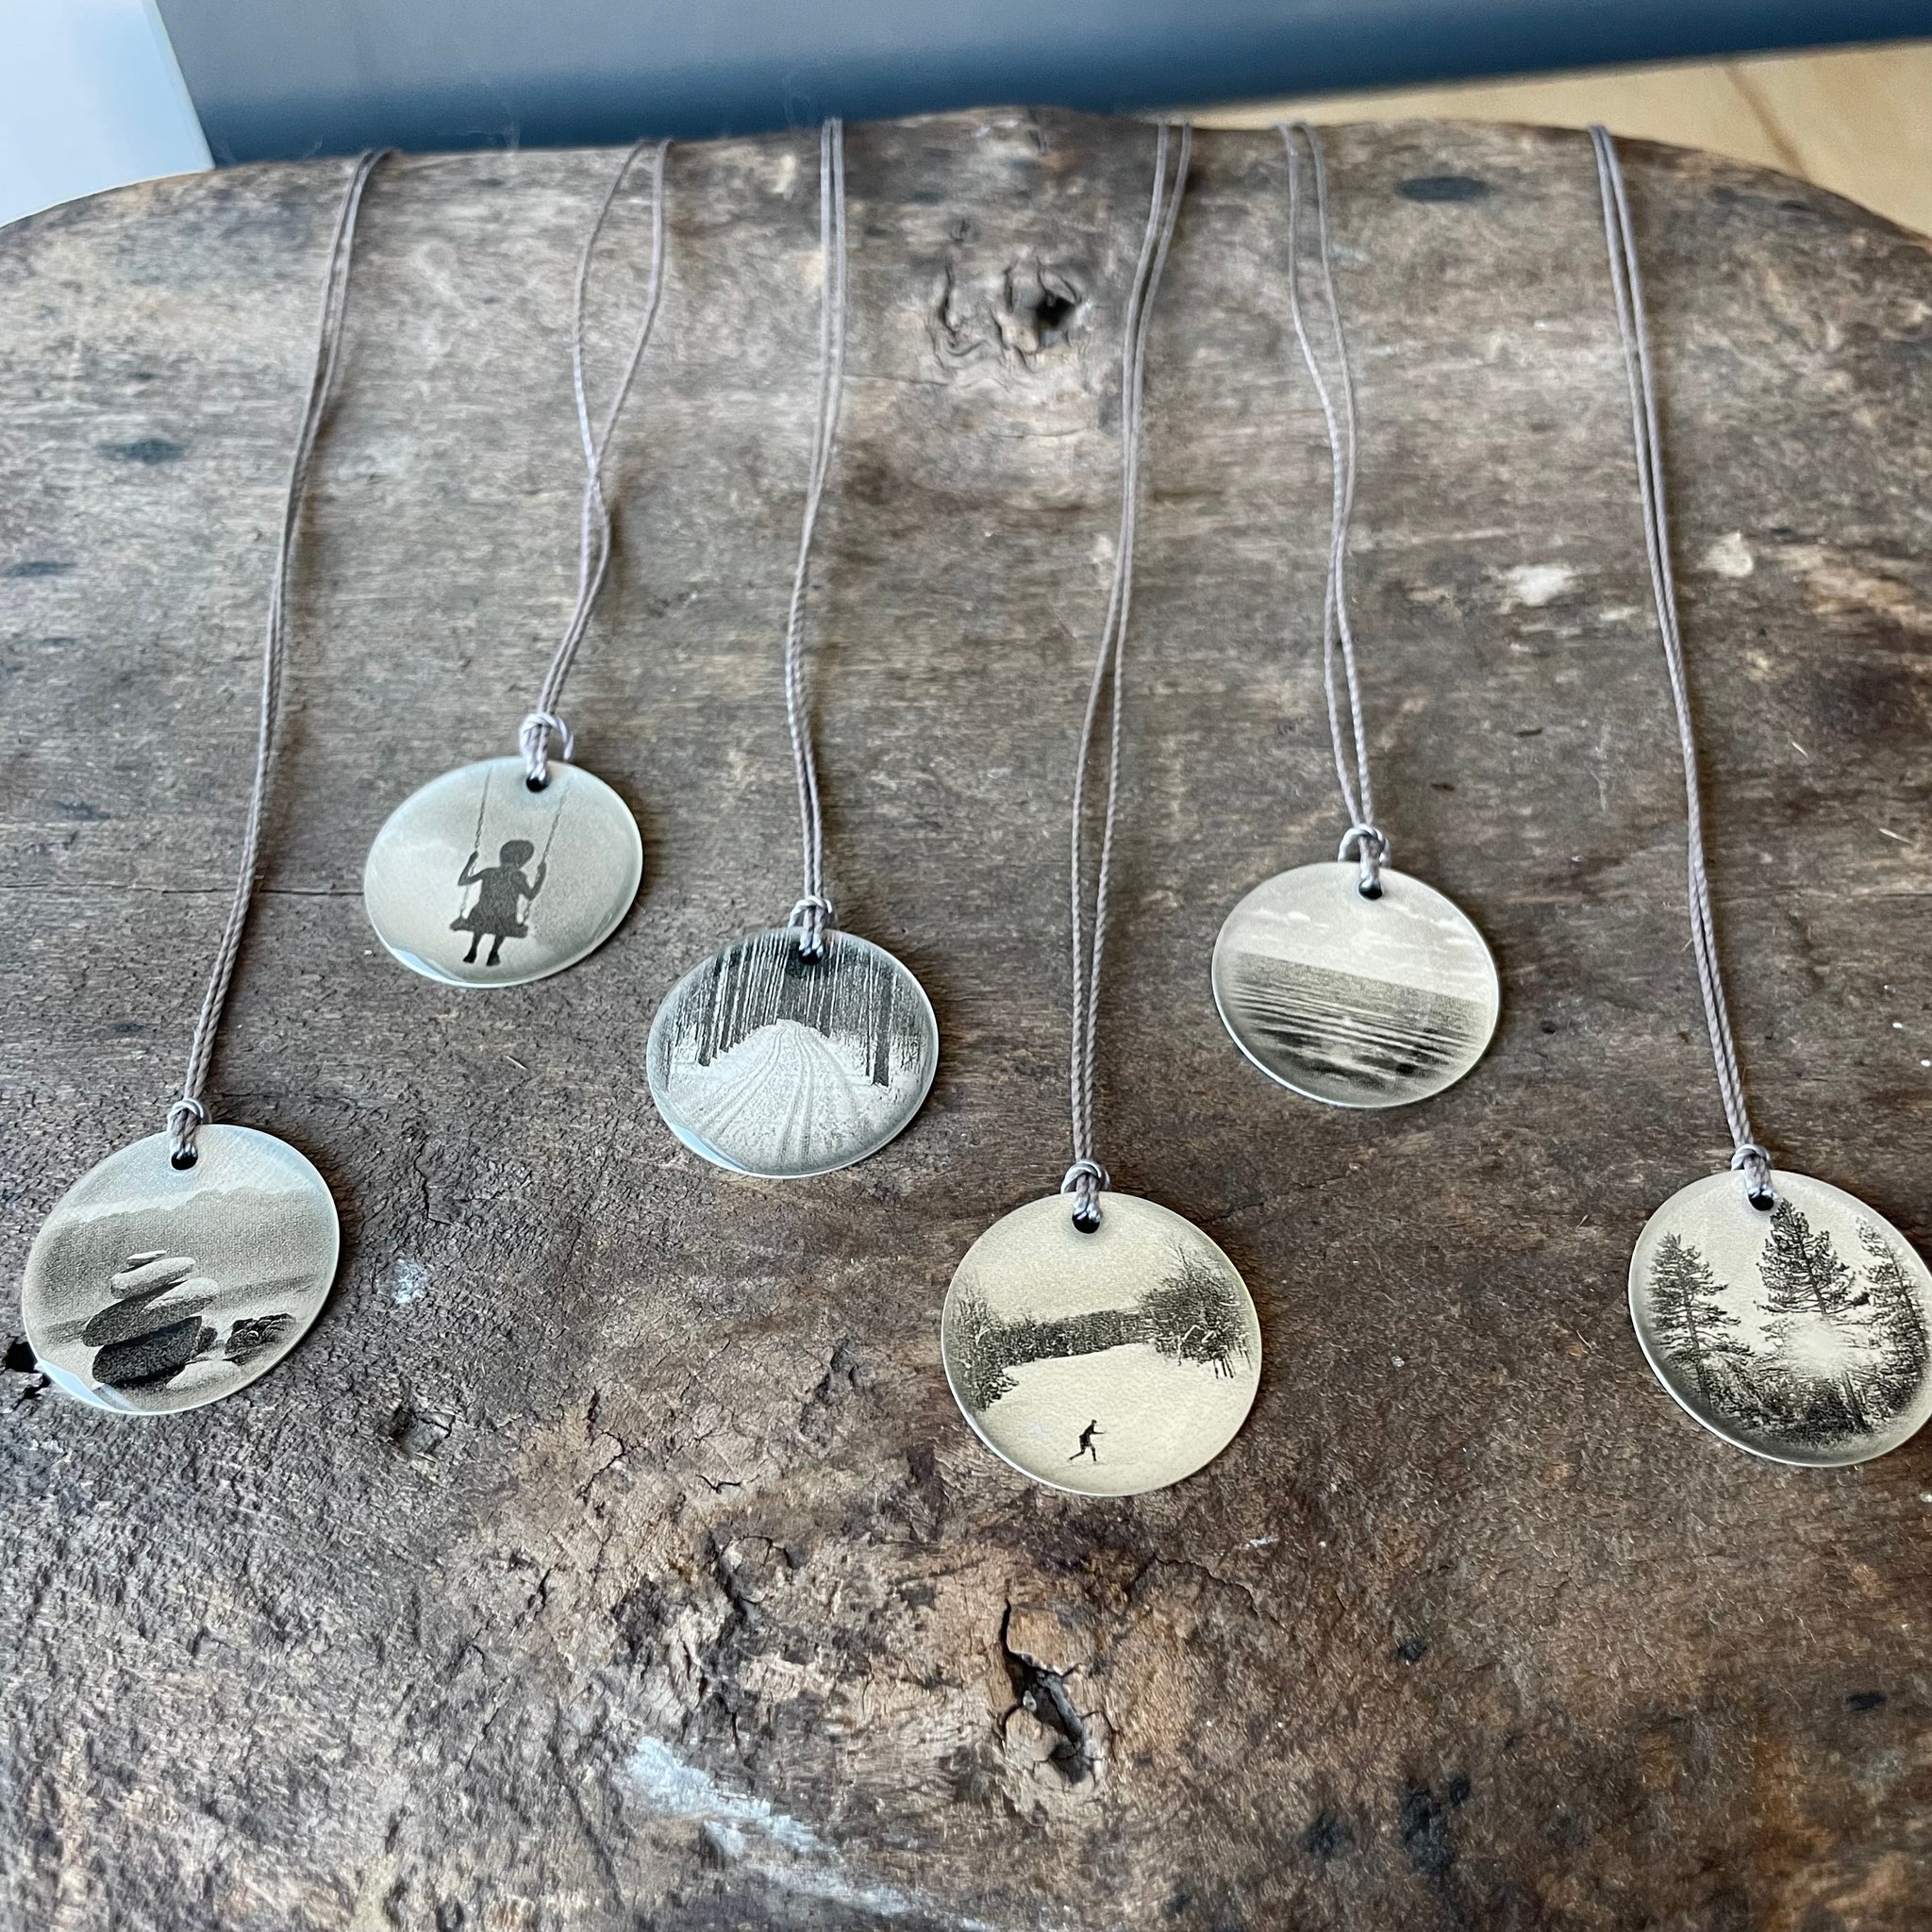 Cross Country Skier Photo Necklace by Everyday Artifact